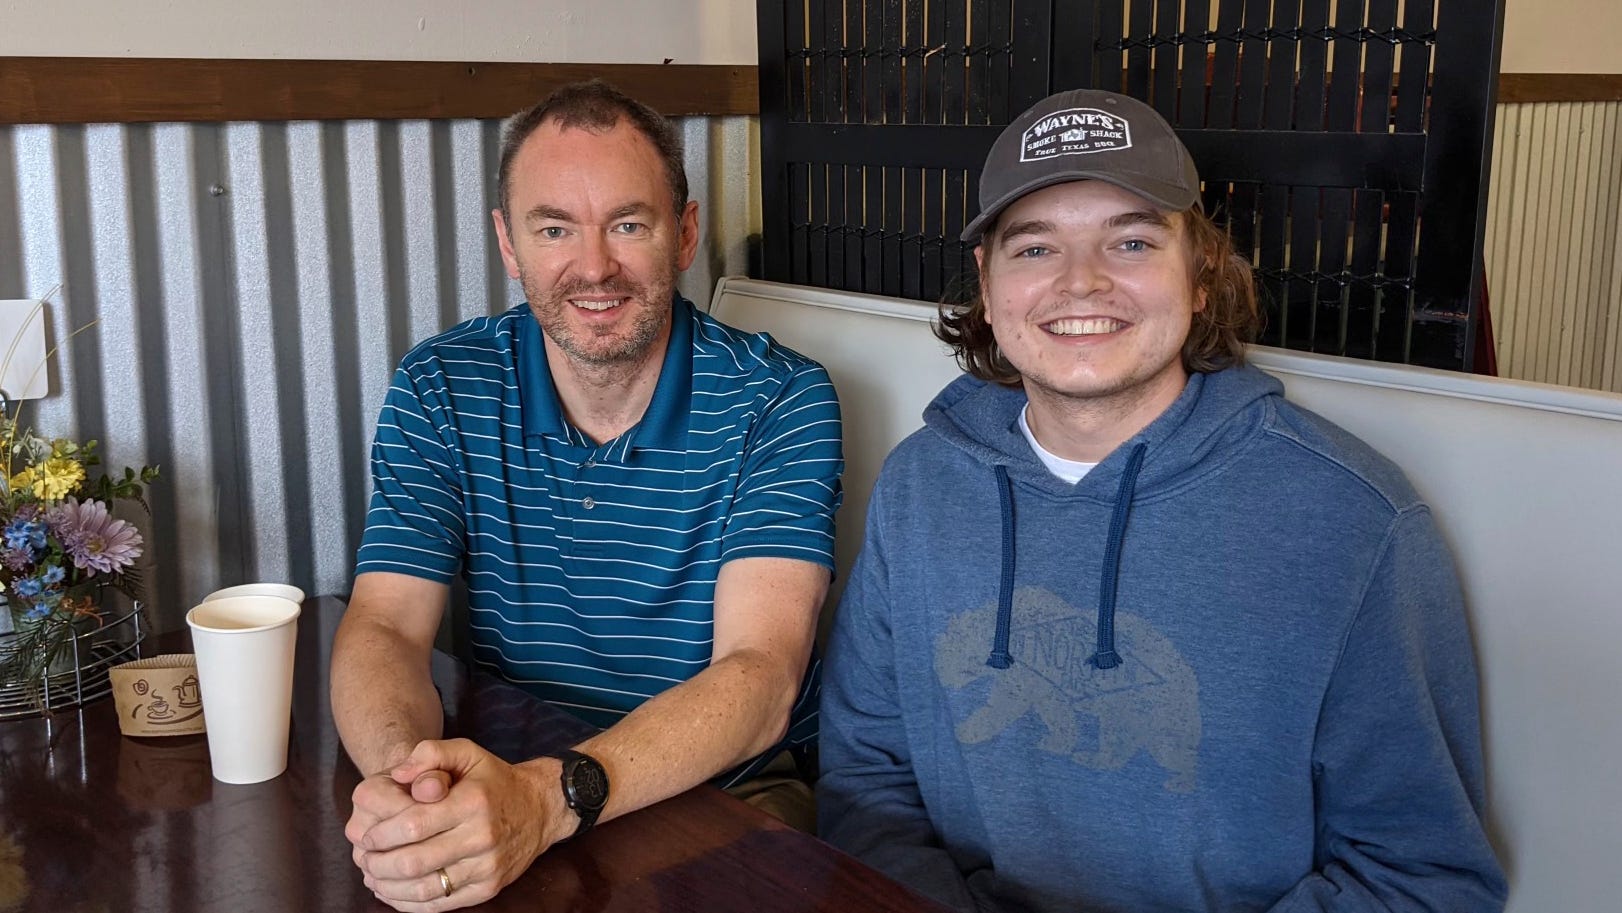 Christian Glass, right, sits with his father, Simon Glass, in Colorado on March 11, 2021. Family members are asking for accountability in the death of Christian Glass, a 22-year-old Colorado man who was shot by police earlier this year after calling 911 for roadside assistance. Christian Glass's parents believed officers escalated a situation that could have been handled differently, and hope the district attorney will bring criminal charges.